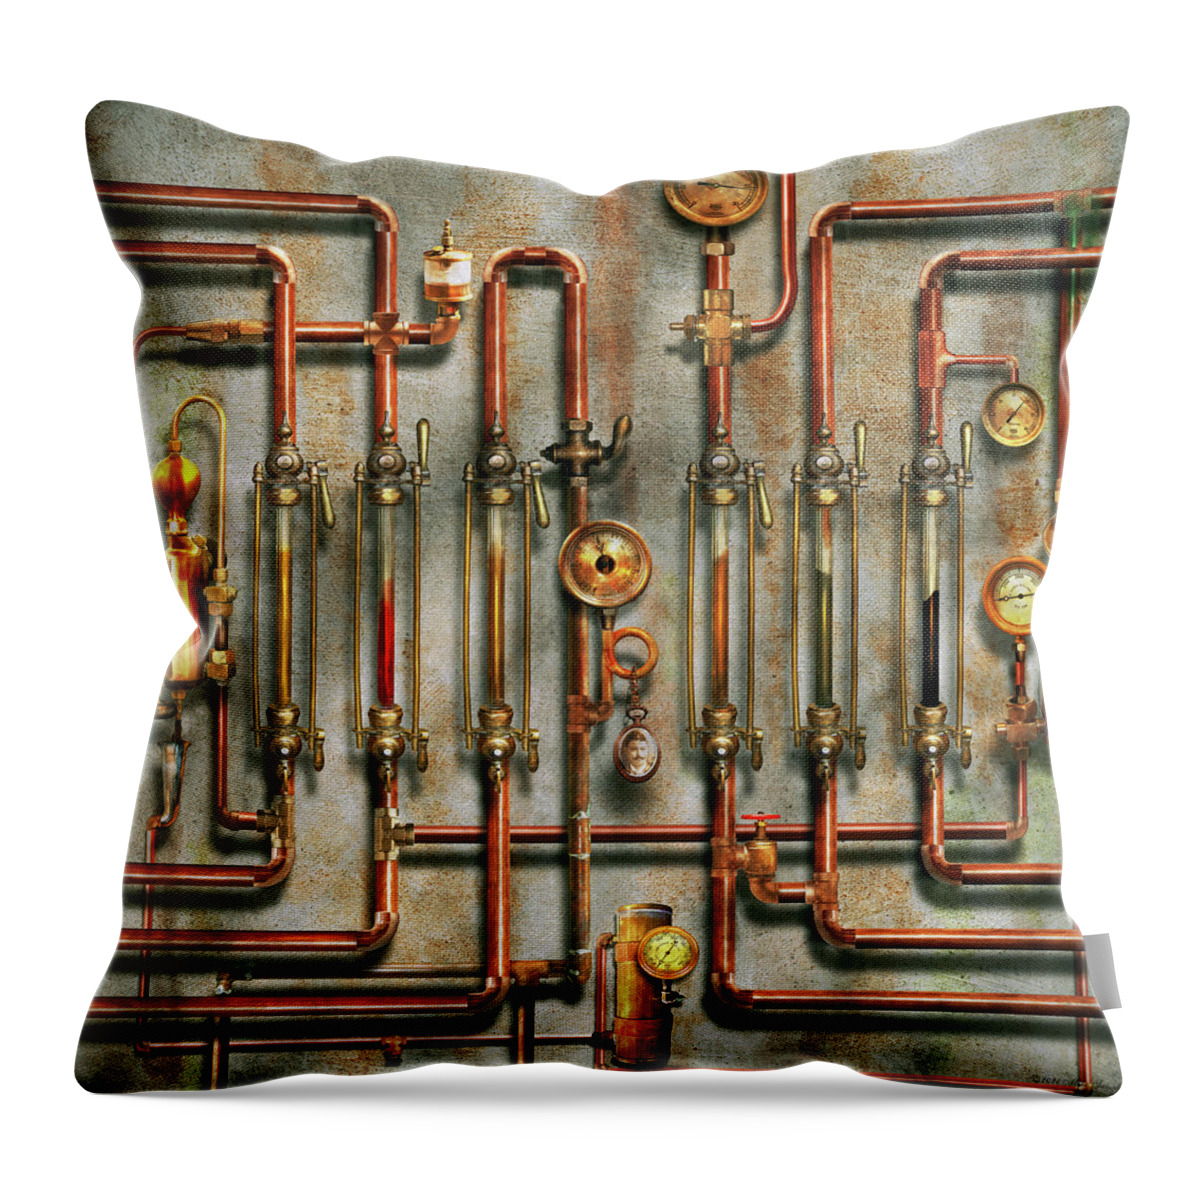 Self Throw Pillow featuring the digital art Steampunk - The lubrication manifold by Mike Savad